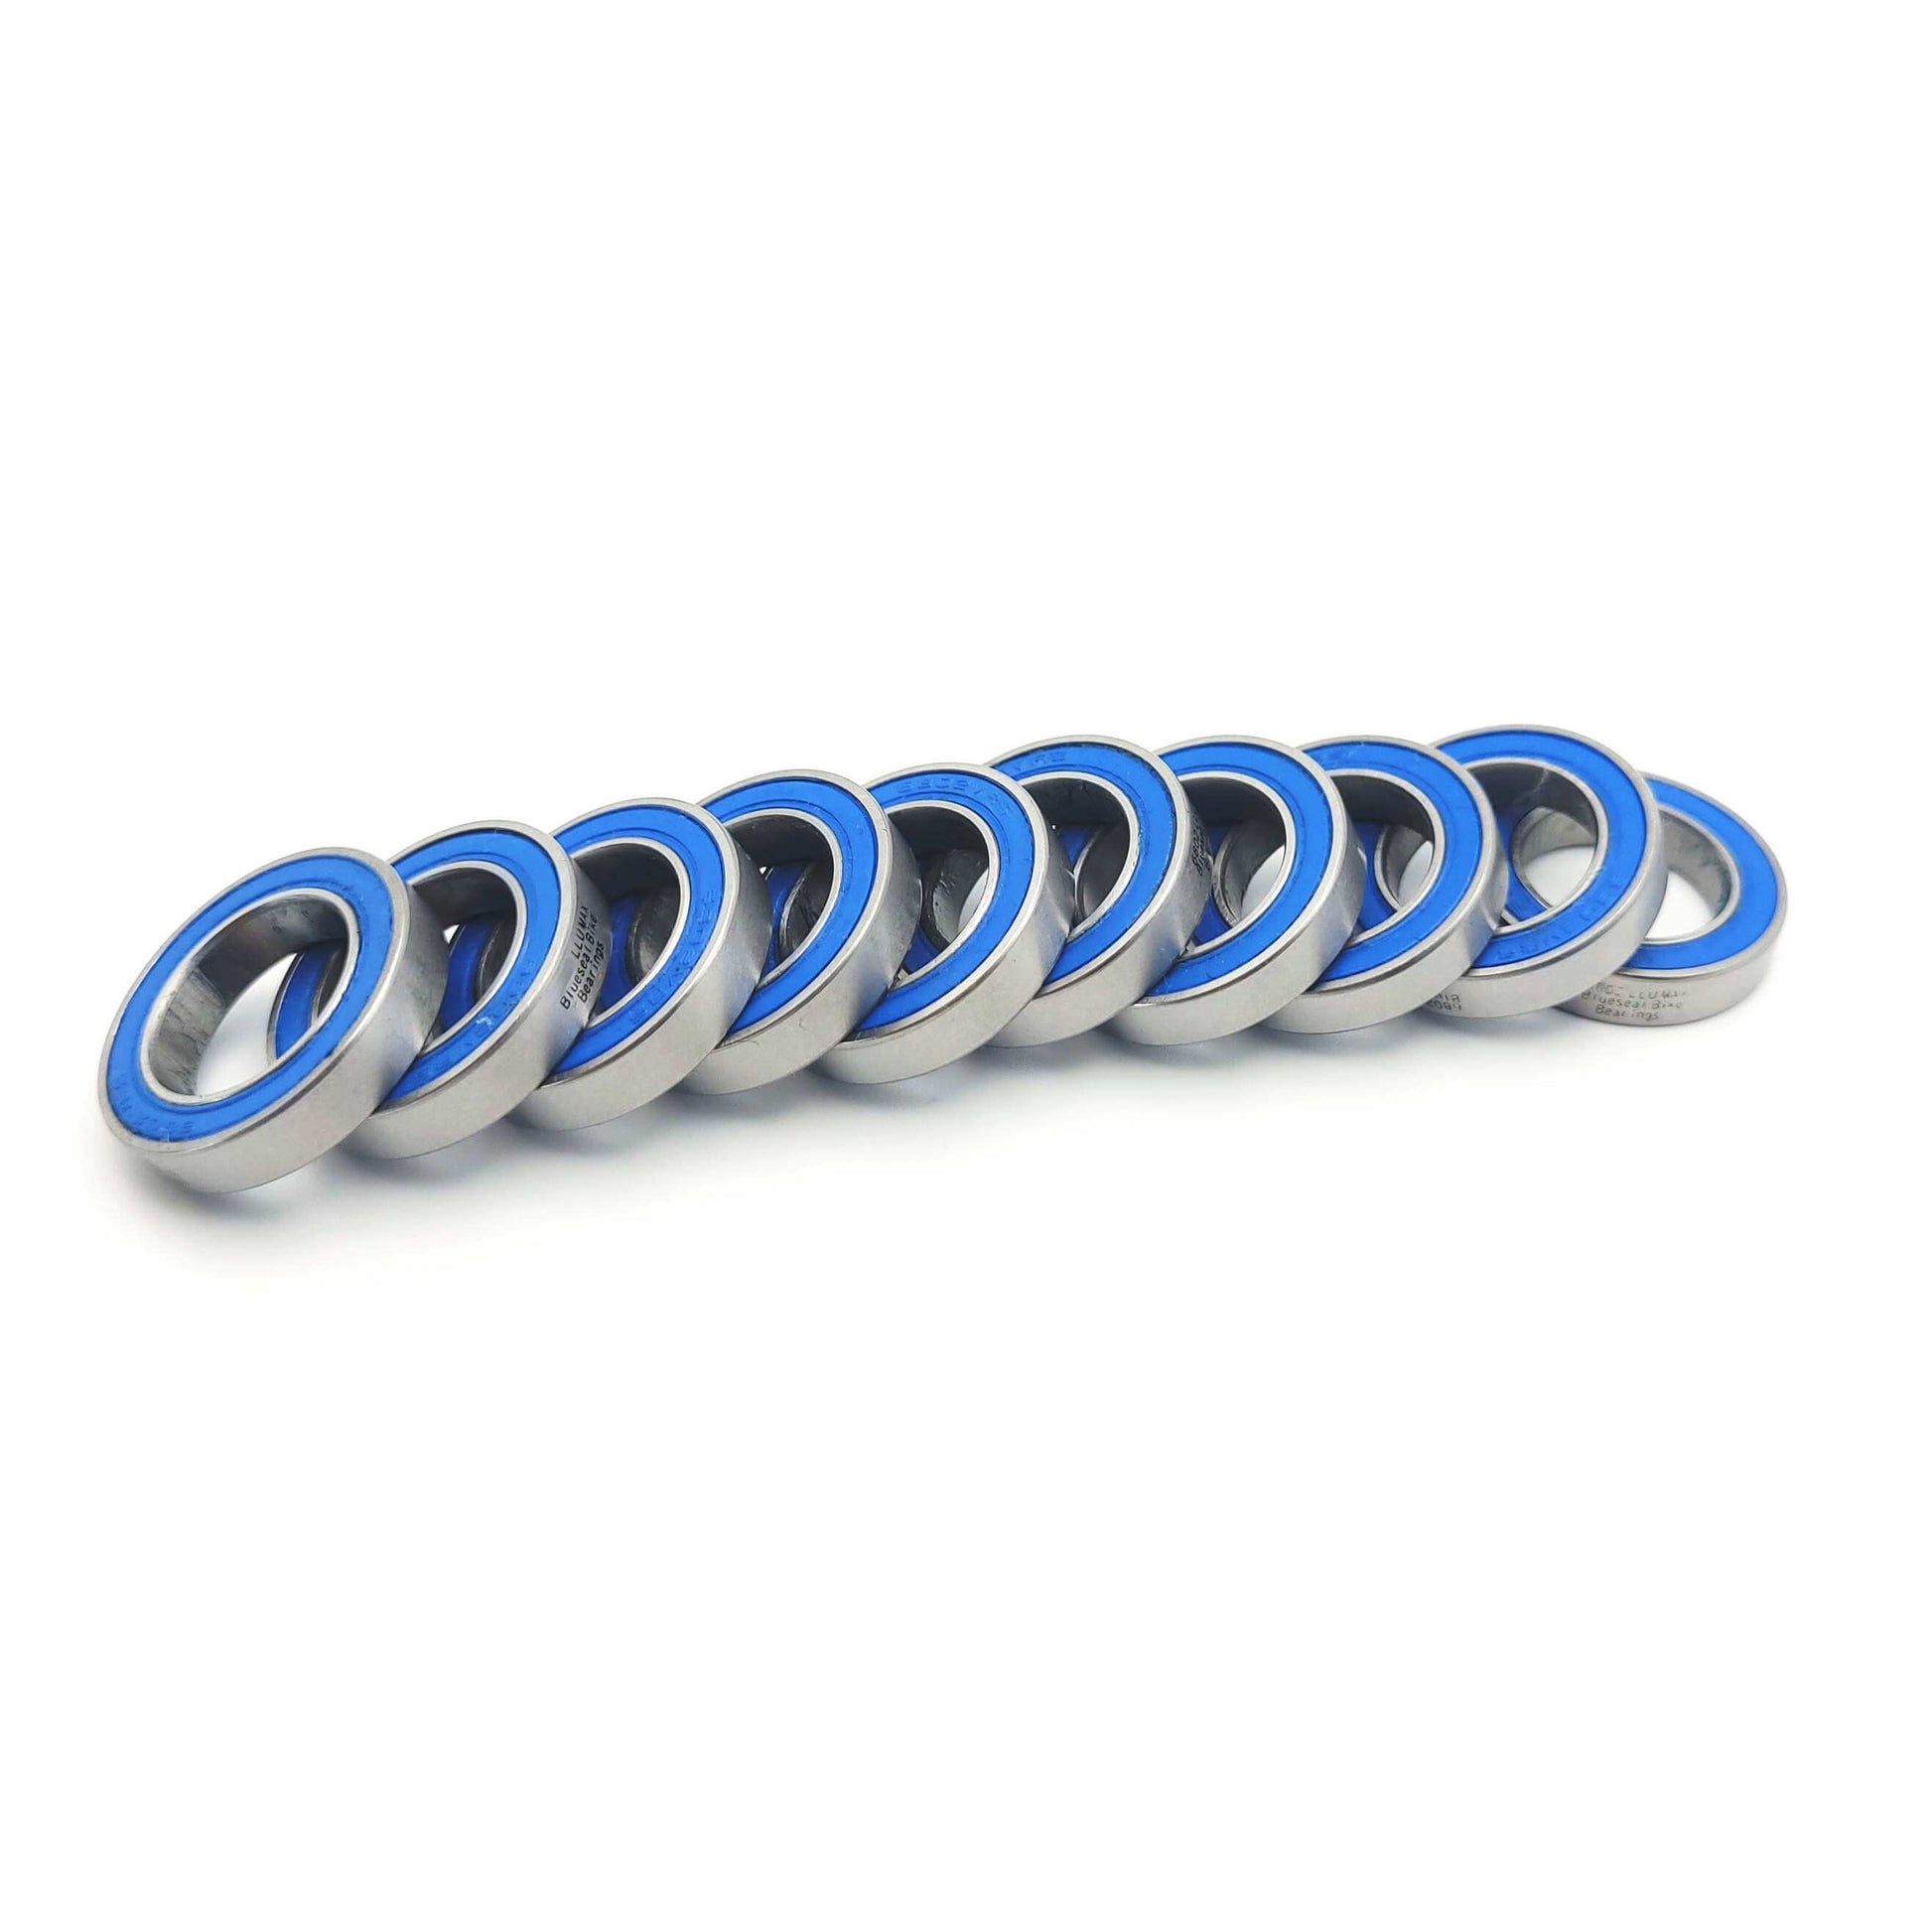 Tues Pivot Bearing Kit | Blueseal MAX Full Complement - Trailvision - Bicycle Bearing Suppliers